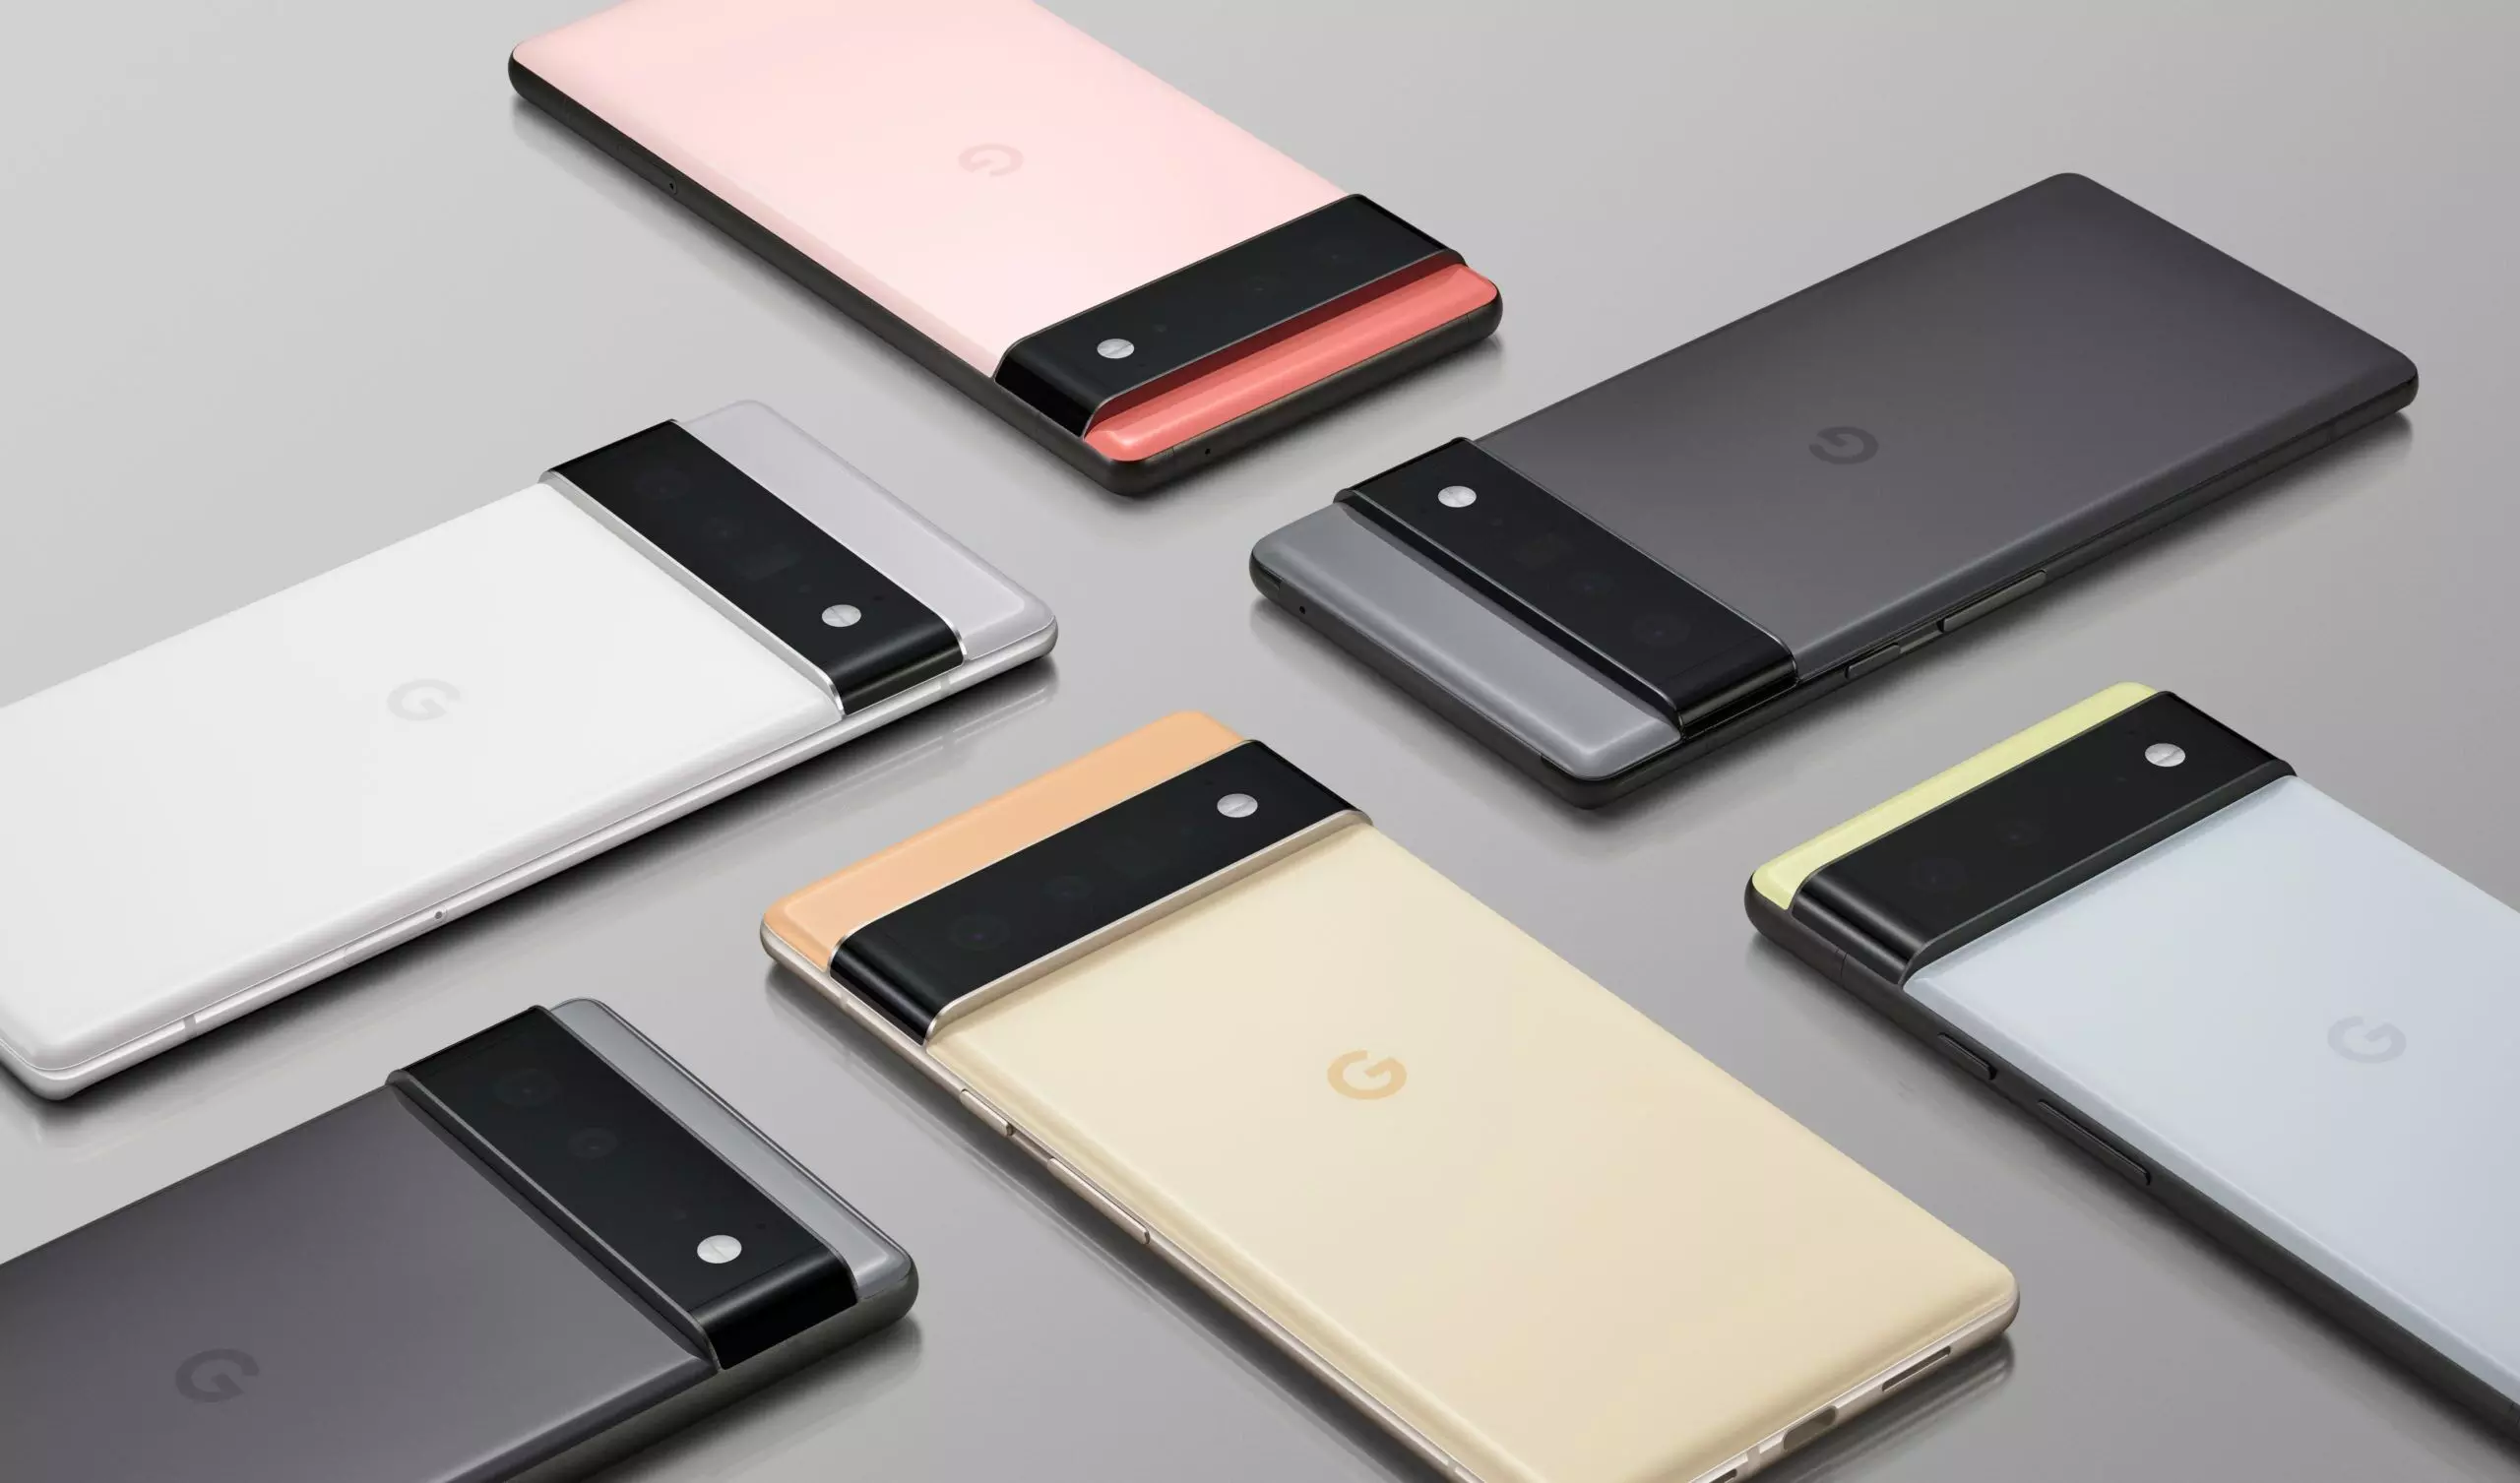 Report: Google Pixel 6 Pro to get 33 W fast charging